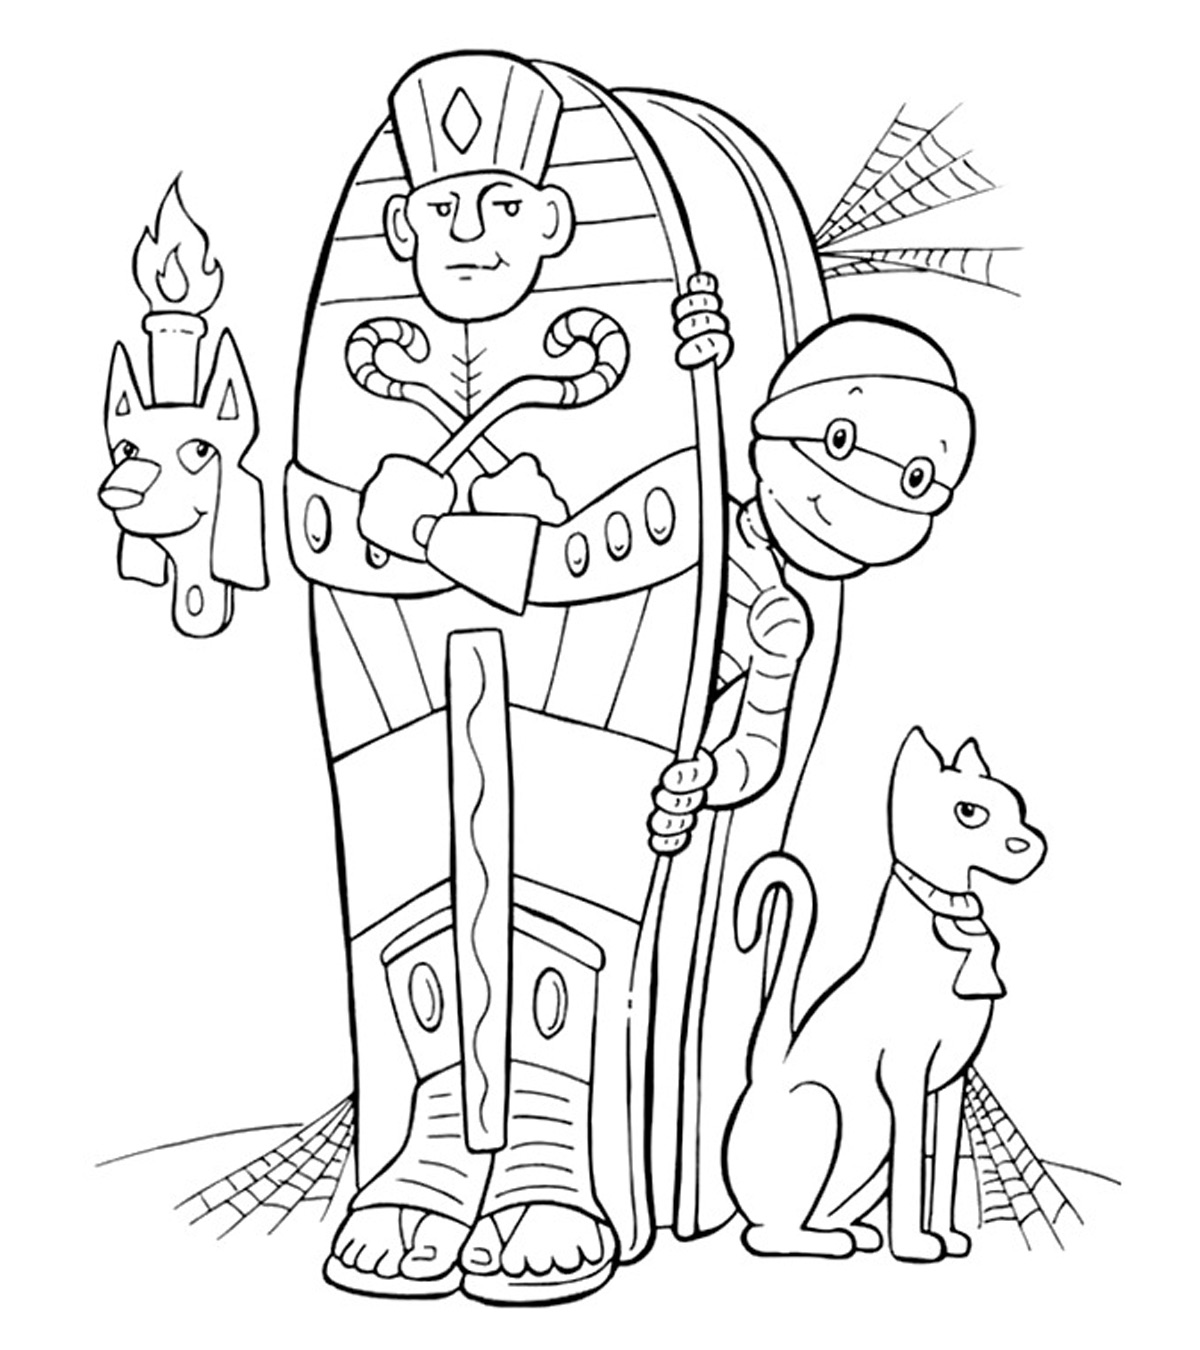 Top 10 Ancient Egypt Coloring Pages For ...momjunction.com